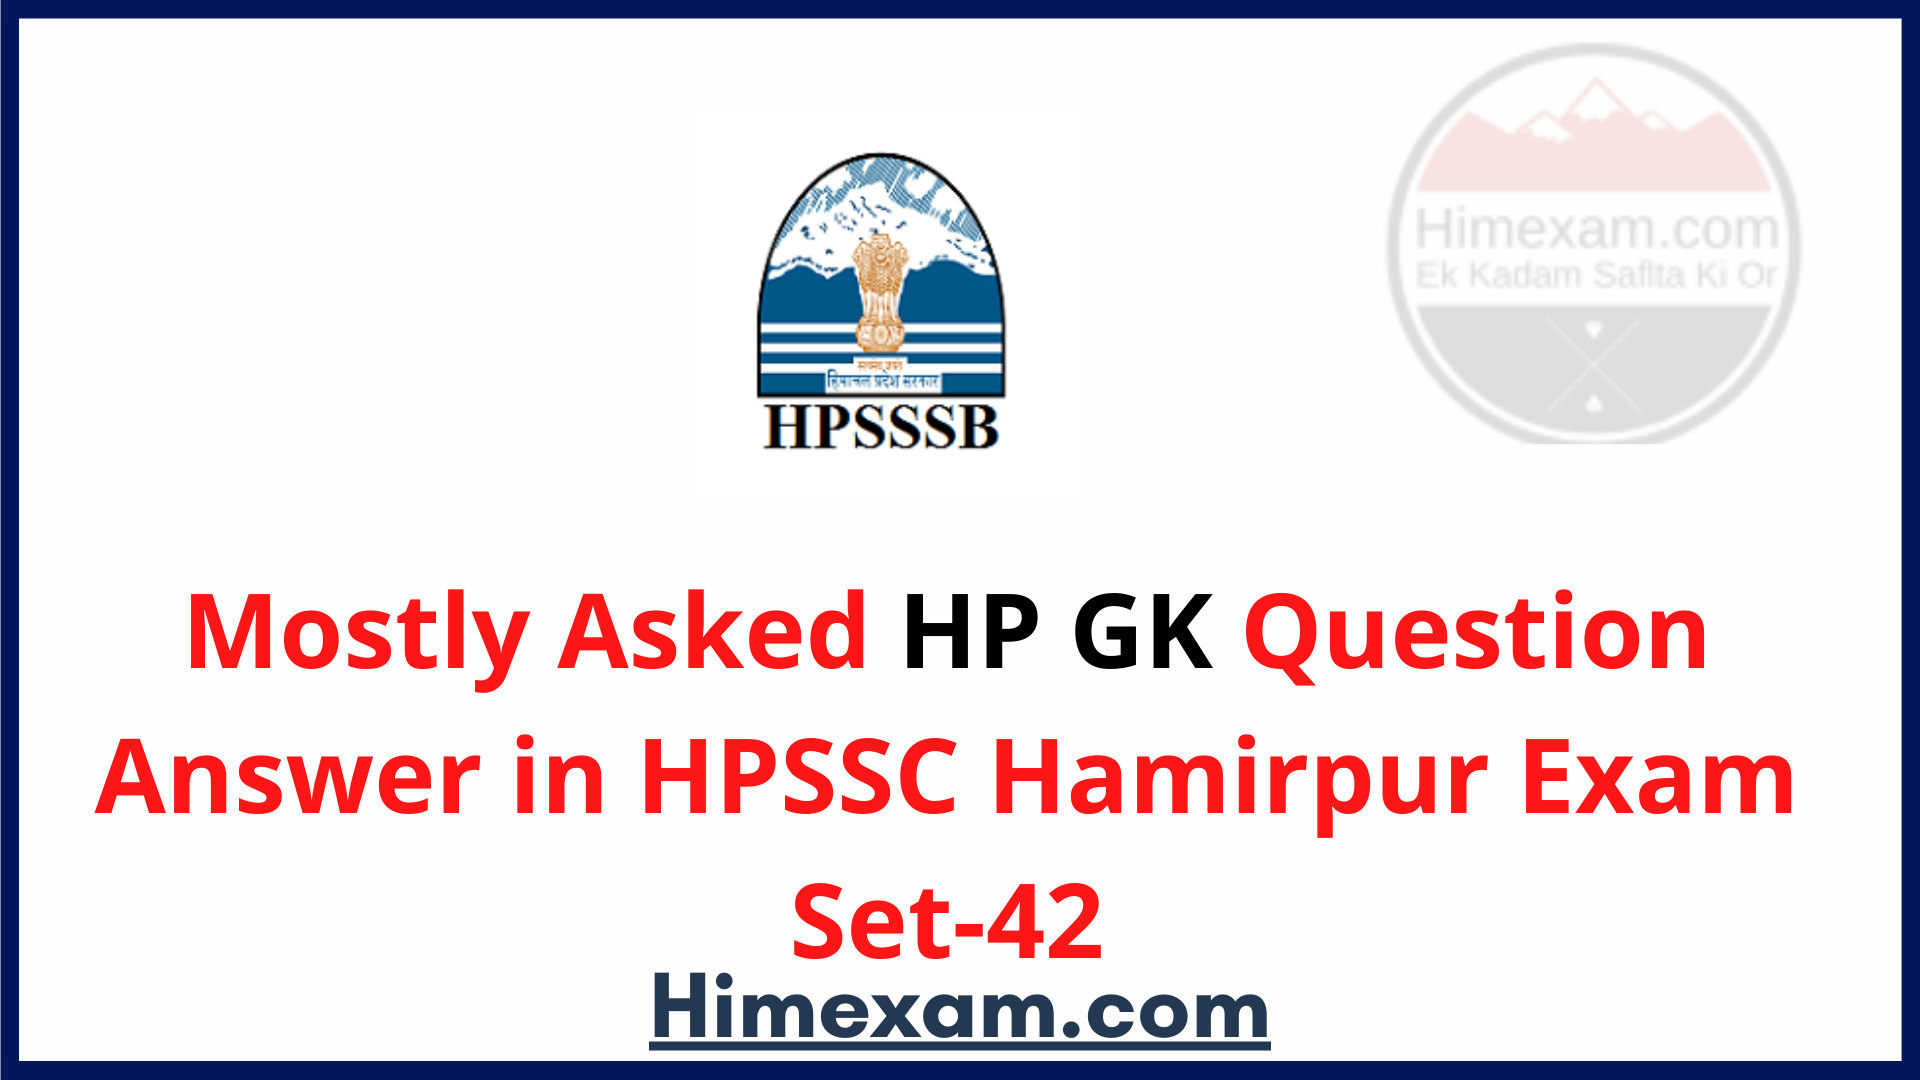 Mostly Asked HP GK Question Answer in HPSSC Hamirpur Exam Set-42